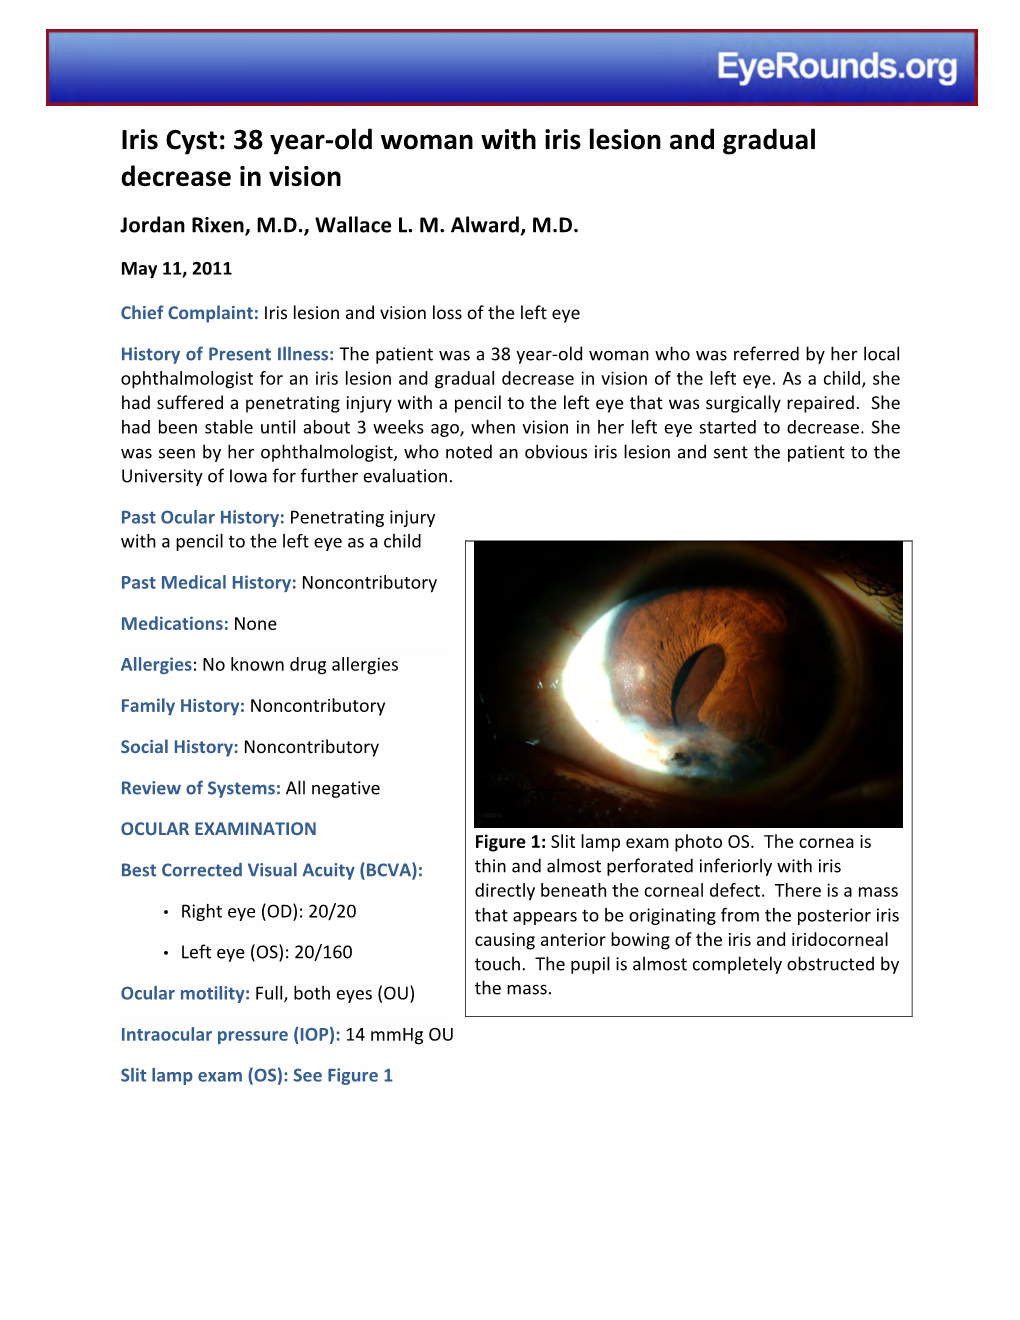 Iris Cyst: 38 Year-Old Woman with Iris Lesion and Gradual Decrease in Vision Jordan Rixen, M.D., Wallace L